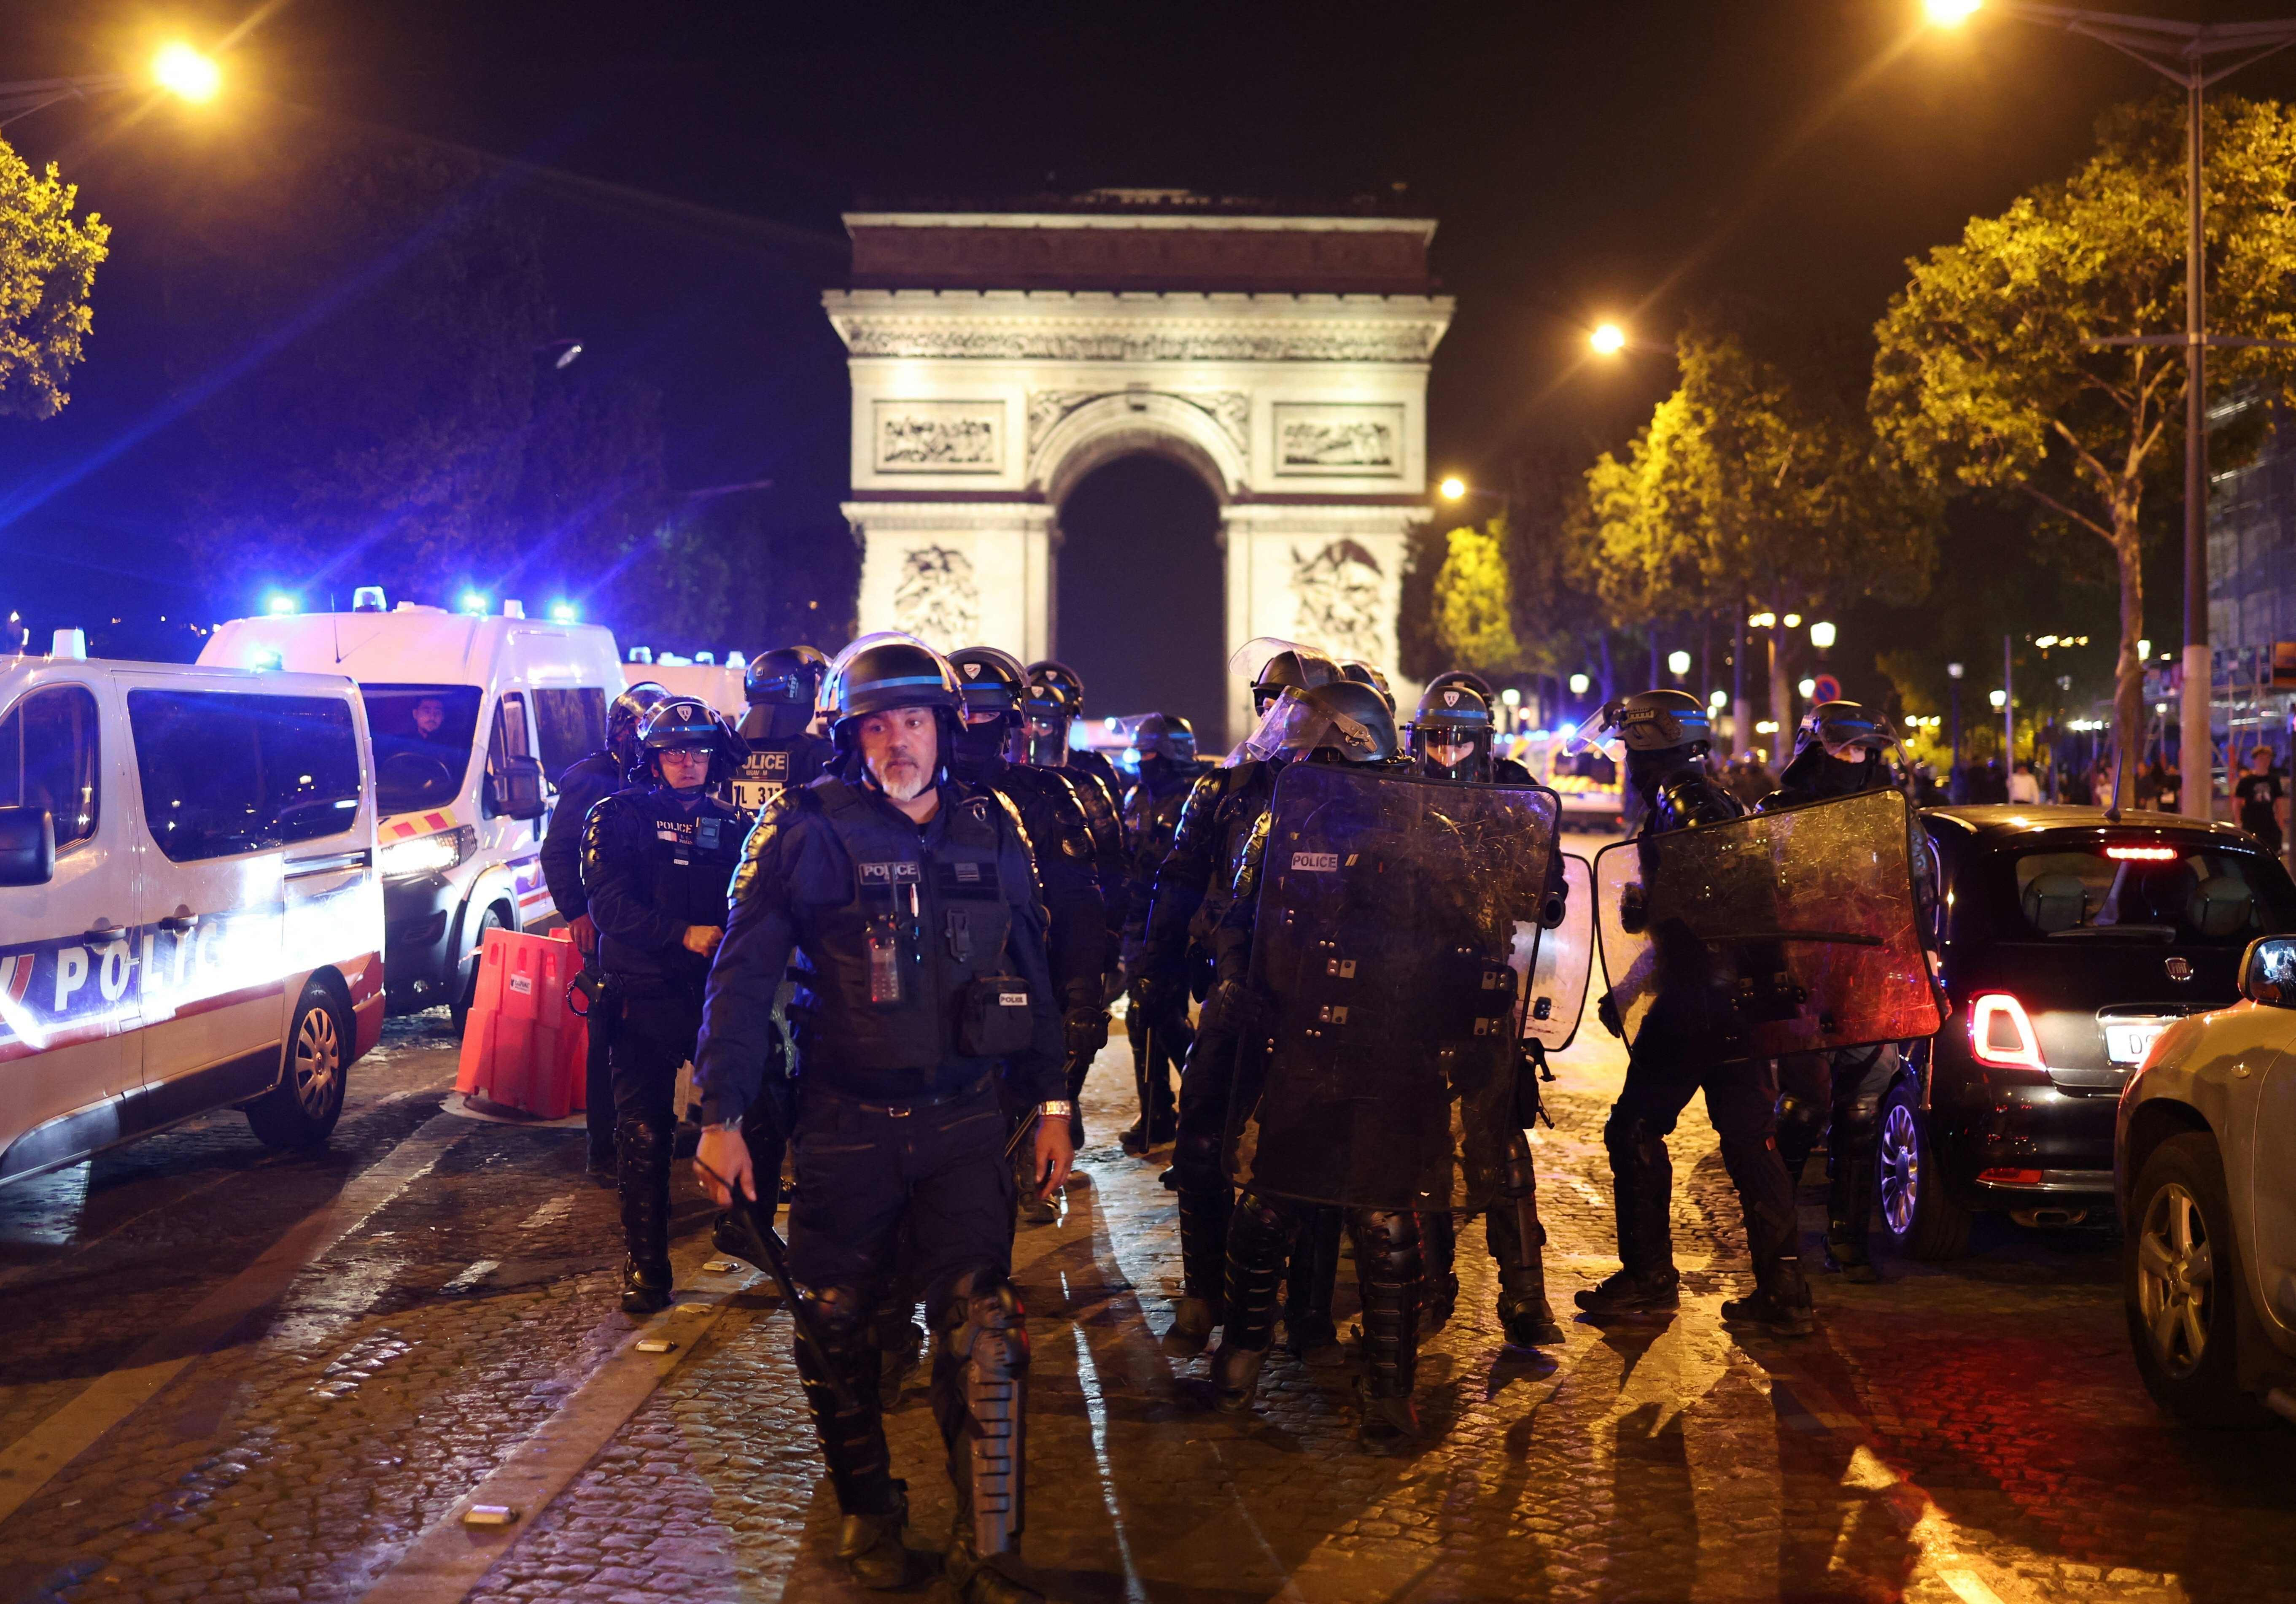 French police officers patrol in front of the Arc de Triomphe in the Champs Elysees area of Paris